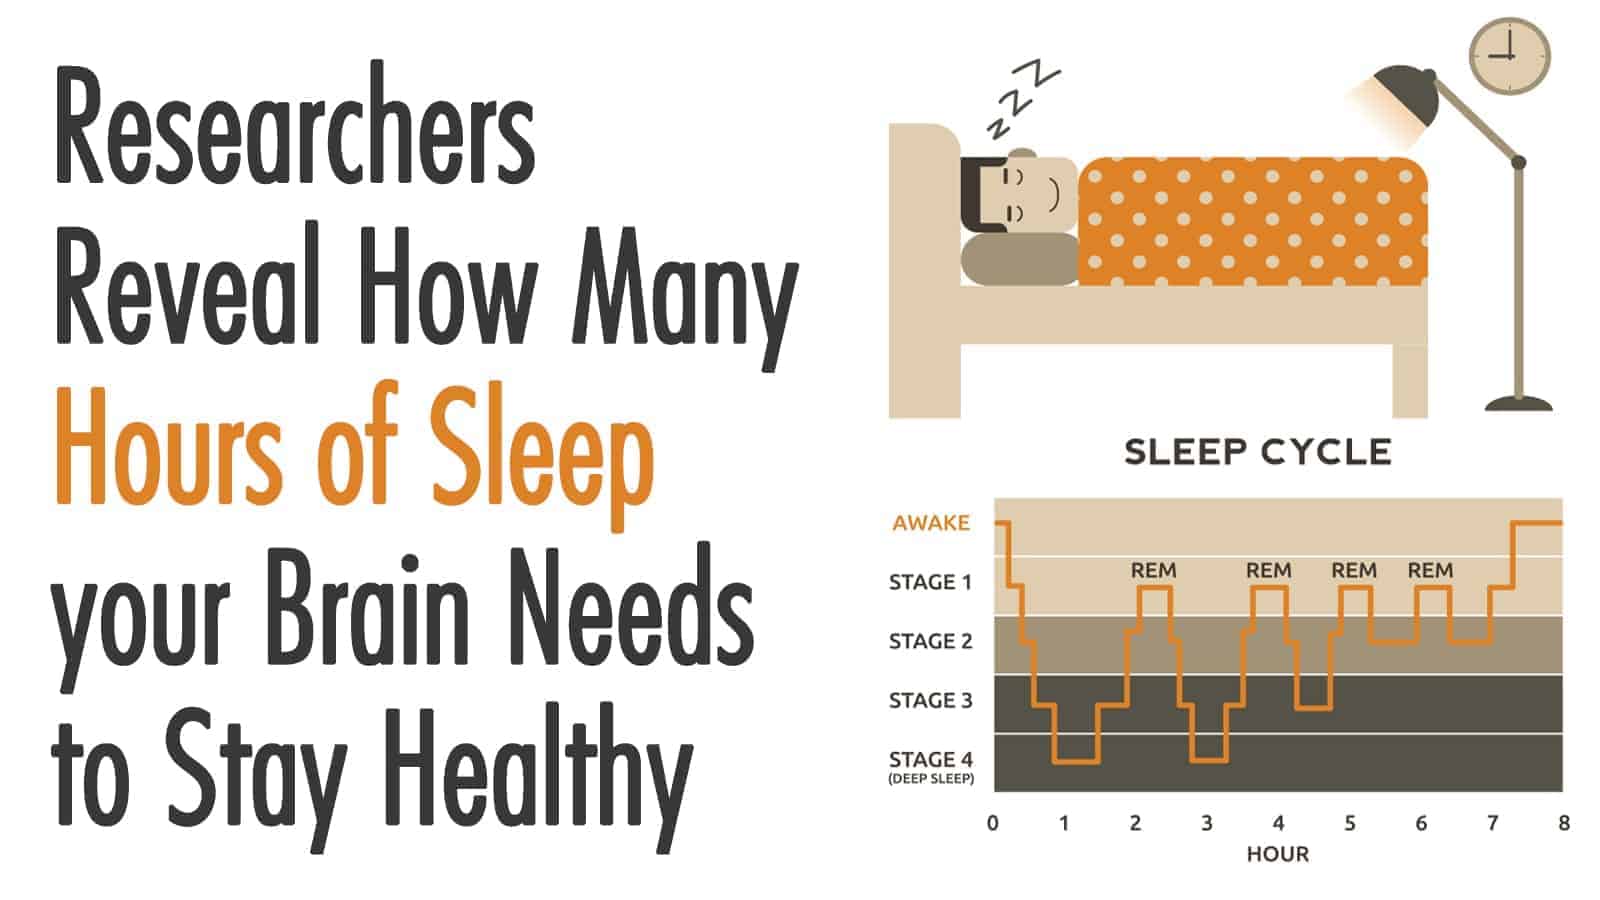 Researchers Reveal How Many Hours of Sleep your Brain Needs to Stay Healthy